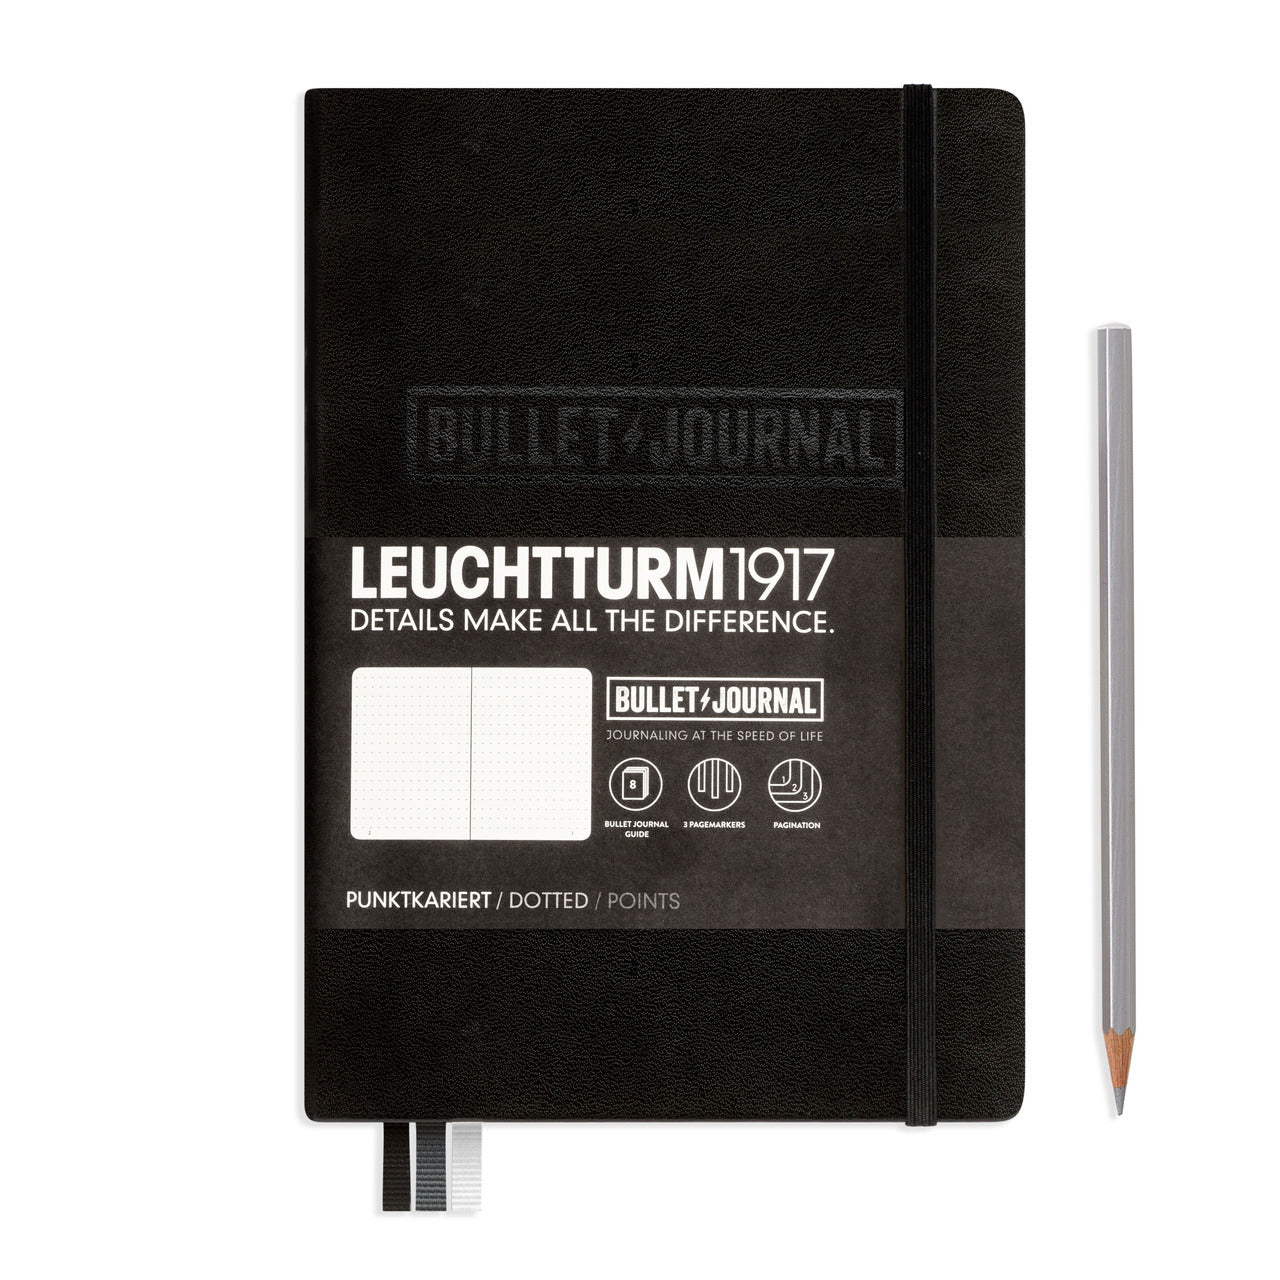 Leuchtturm1917 A5 Bullet Journal with Hardcover, Dotted Pages, and Black Cover. 